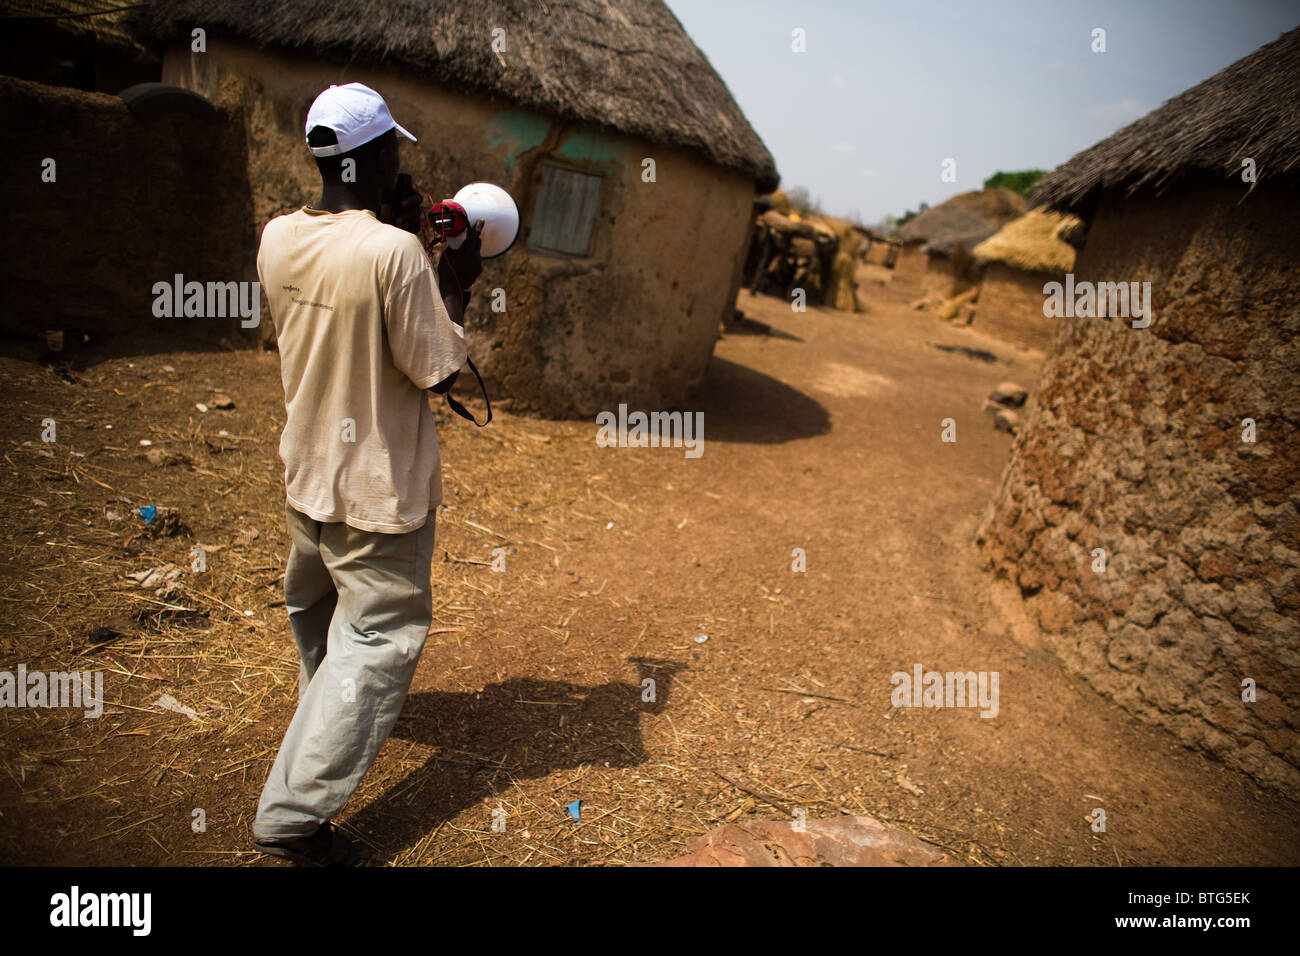 A community volunteer uses a megaphone to announce an upcoming national polio immunization campaign Stock Photo